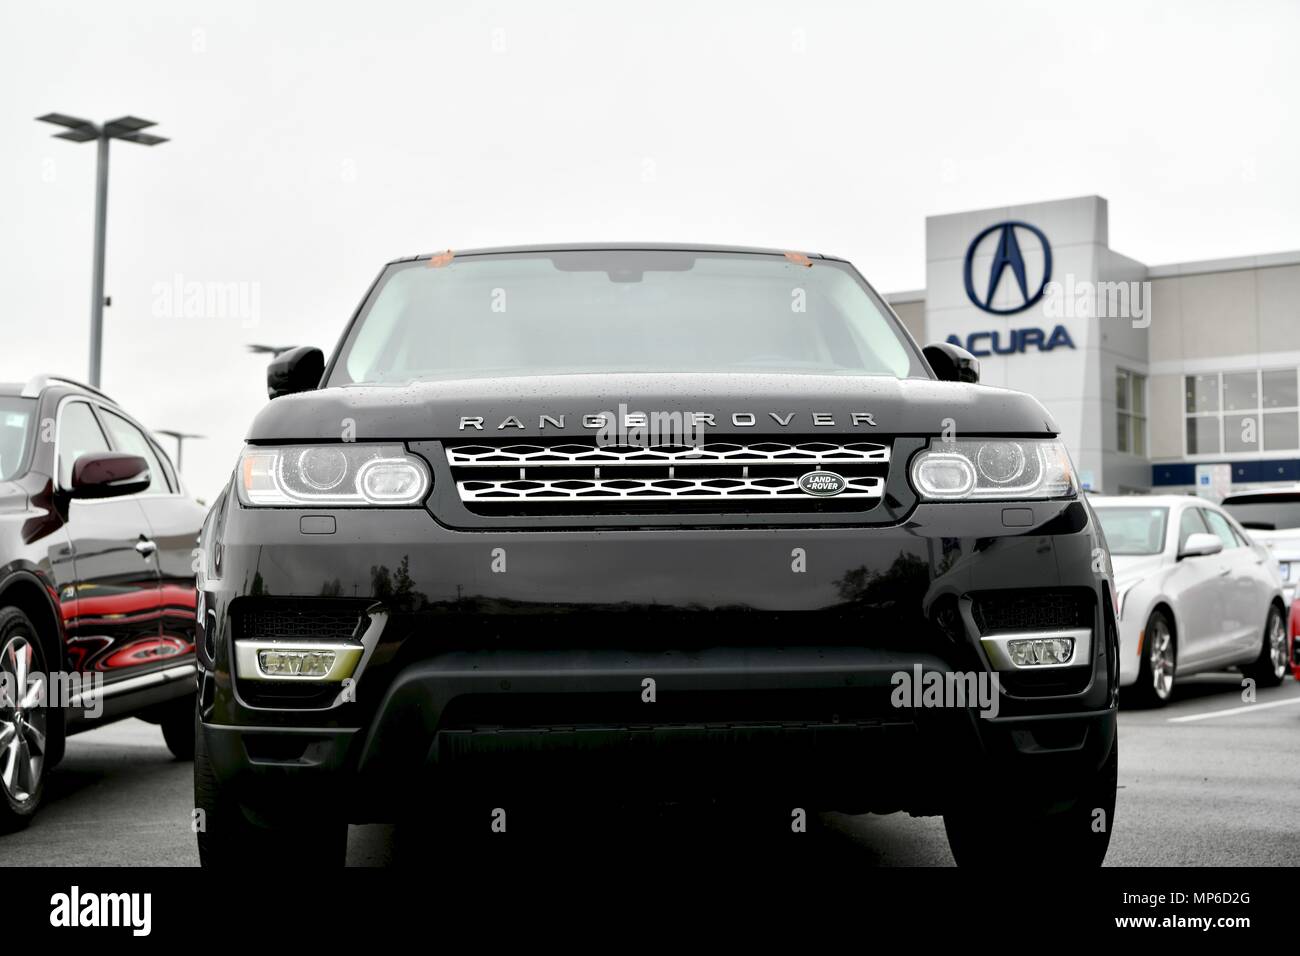 Black Range Rover for sale parked at the Annapolis Acura car dealership, MD, USA Stock Photo